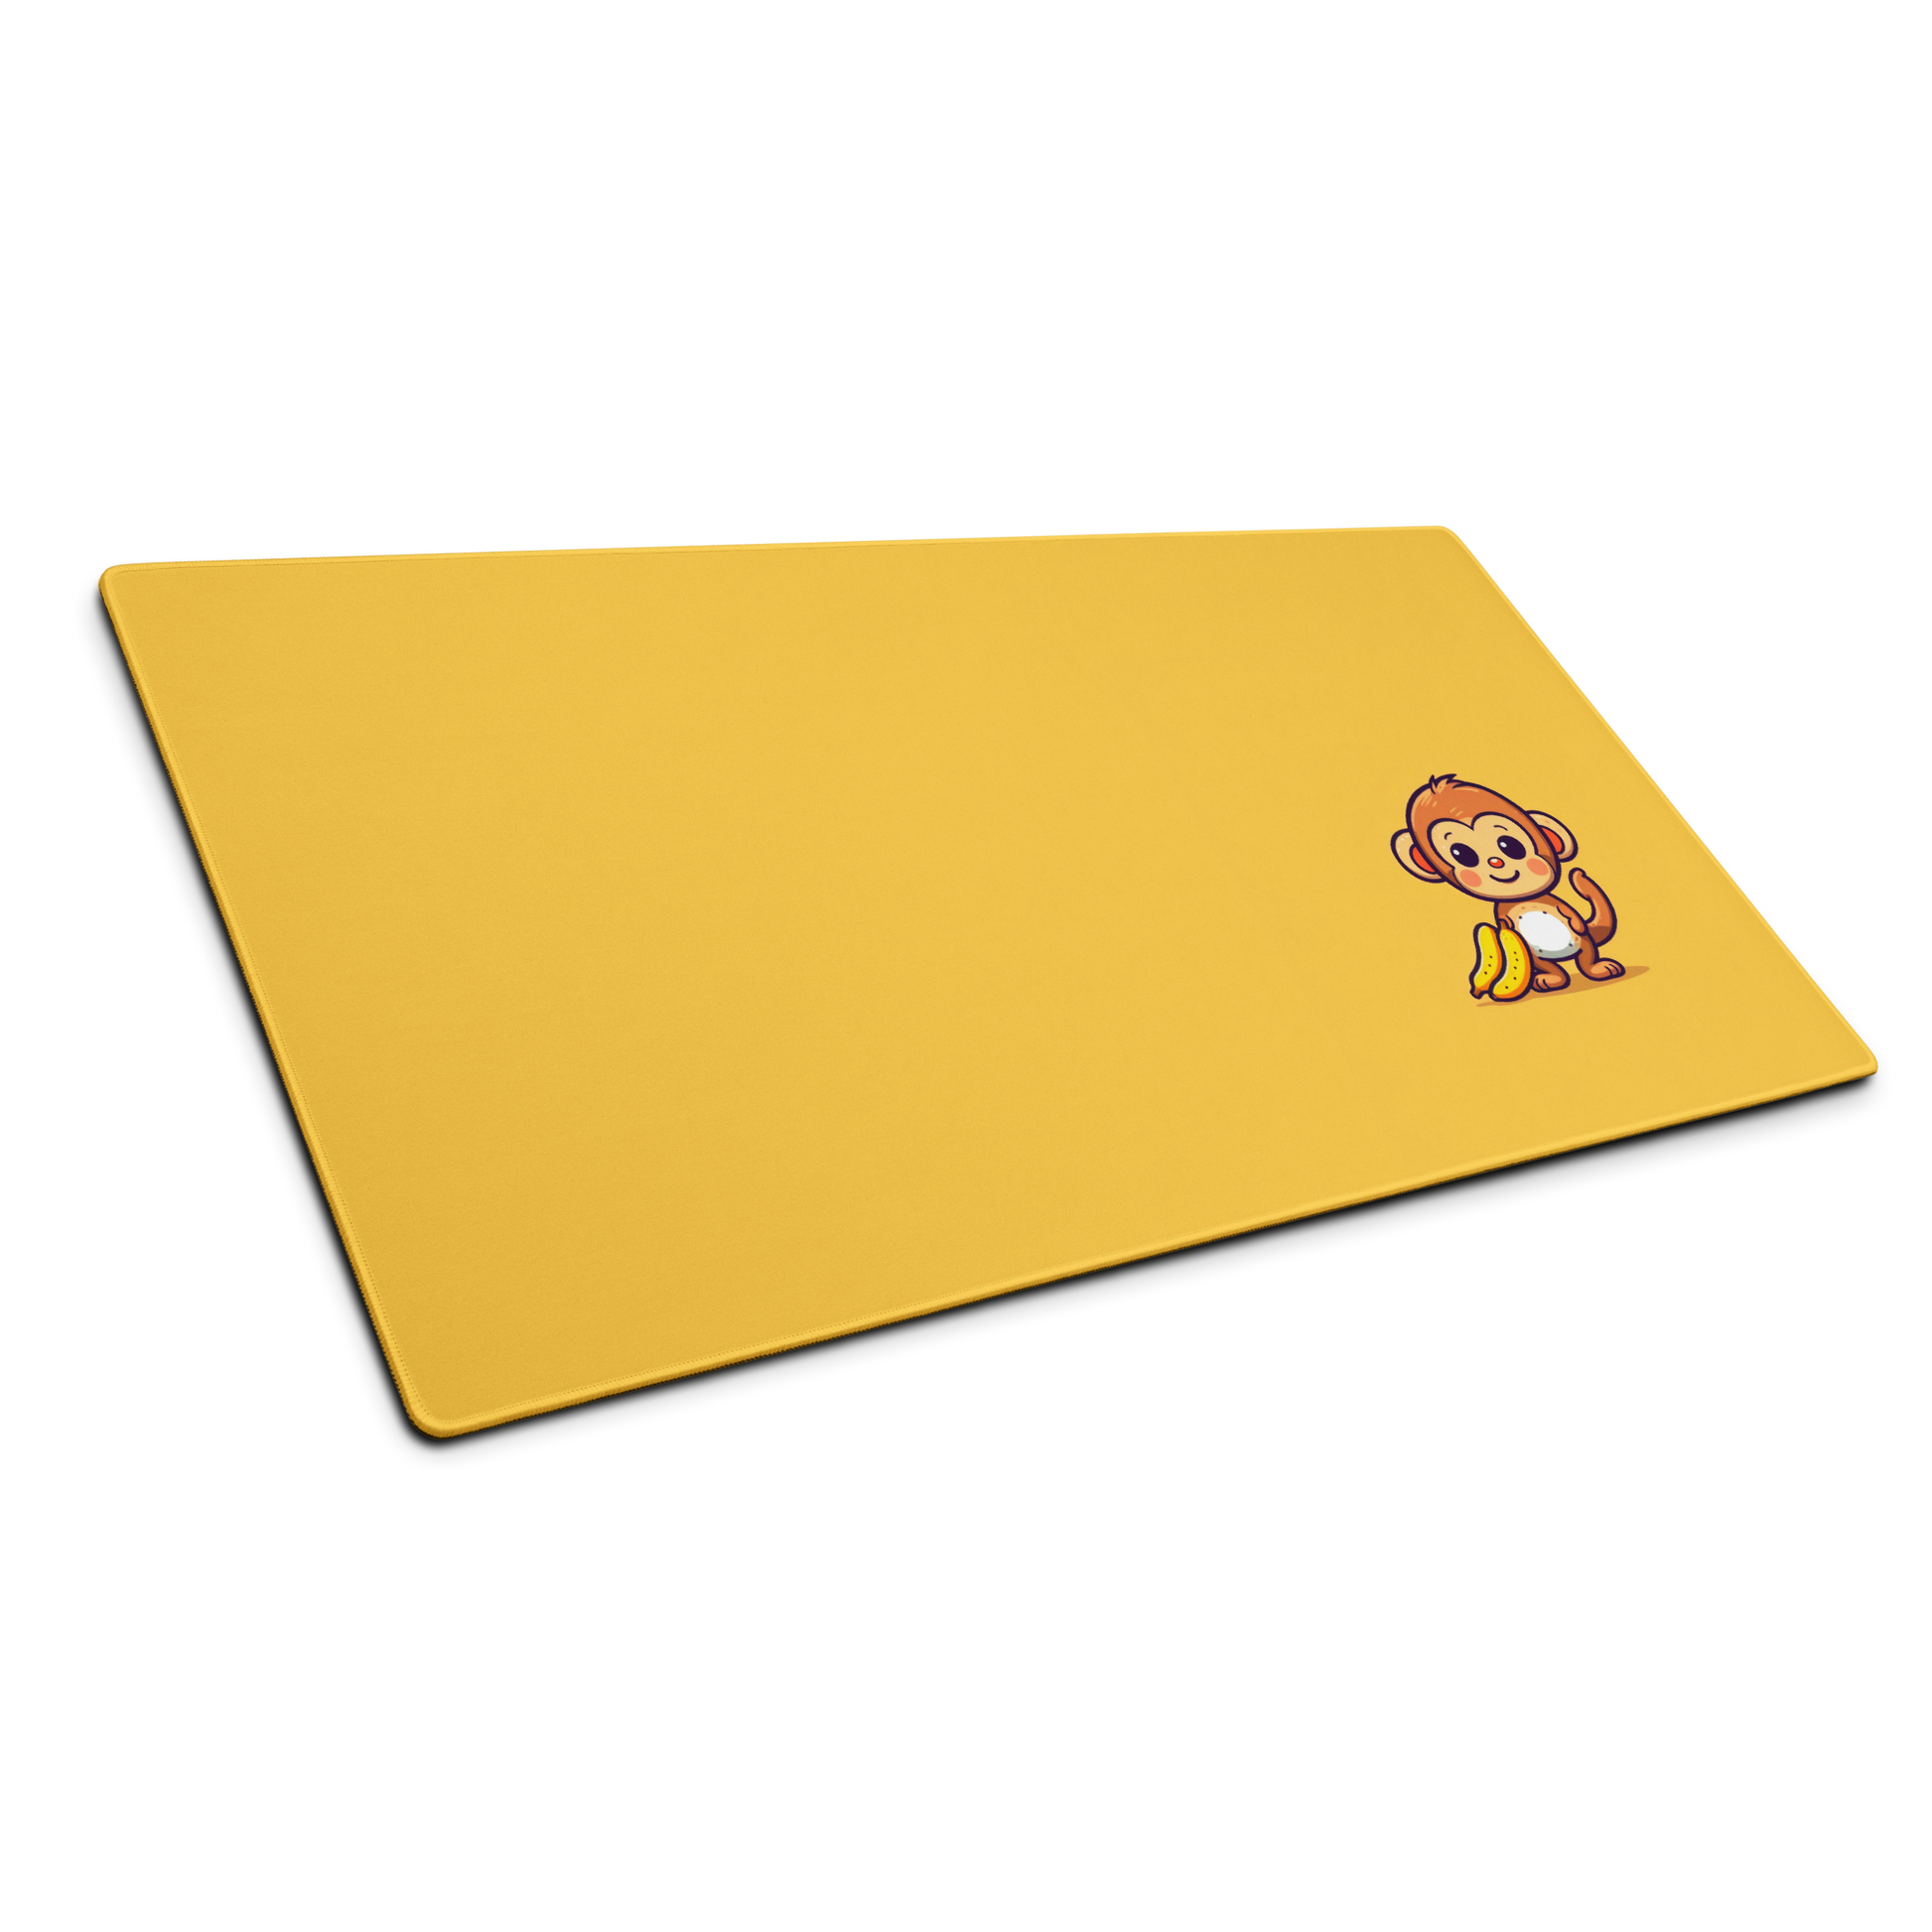 A 36" x 18" desk pad with a cute monkey holding bananas shown at an angle. Yellow in color.